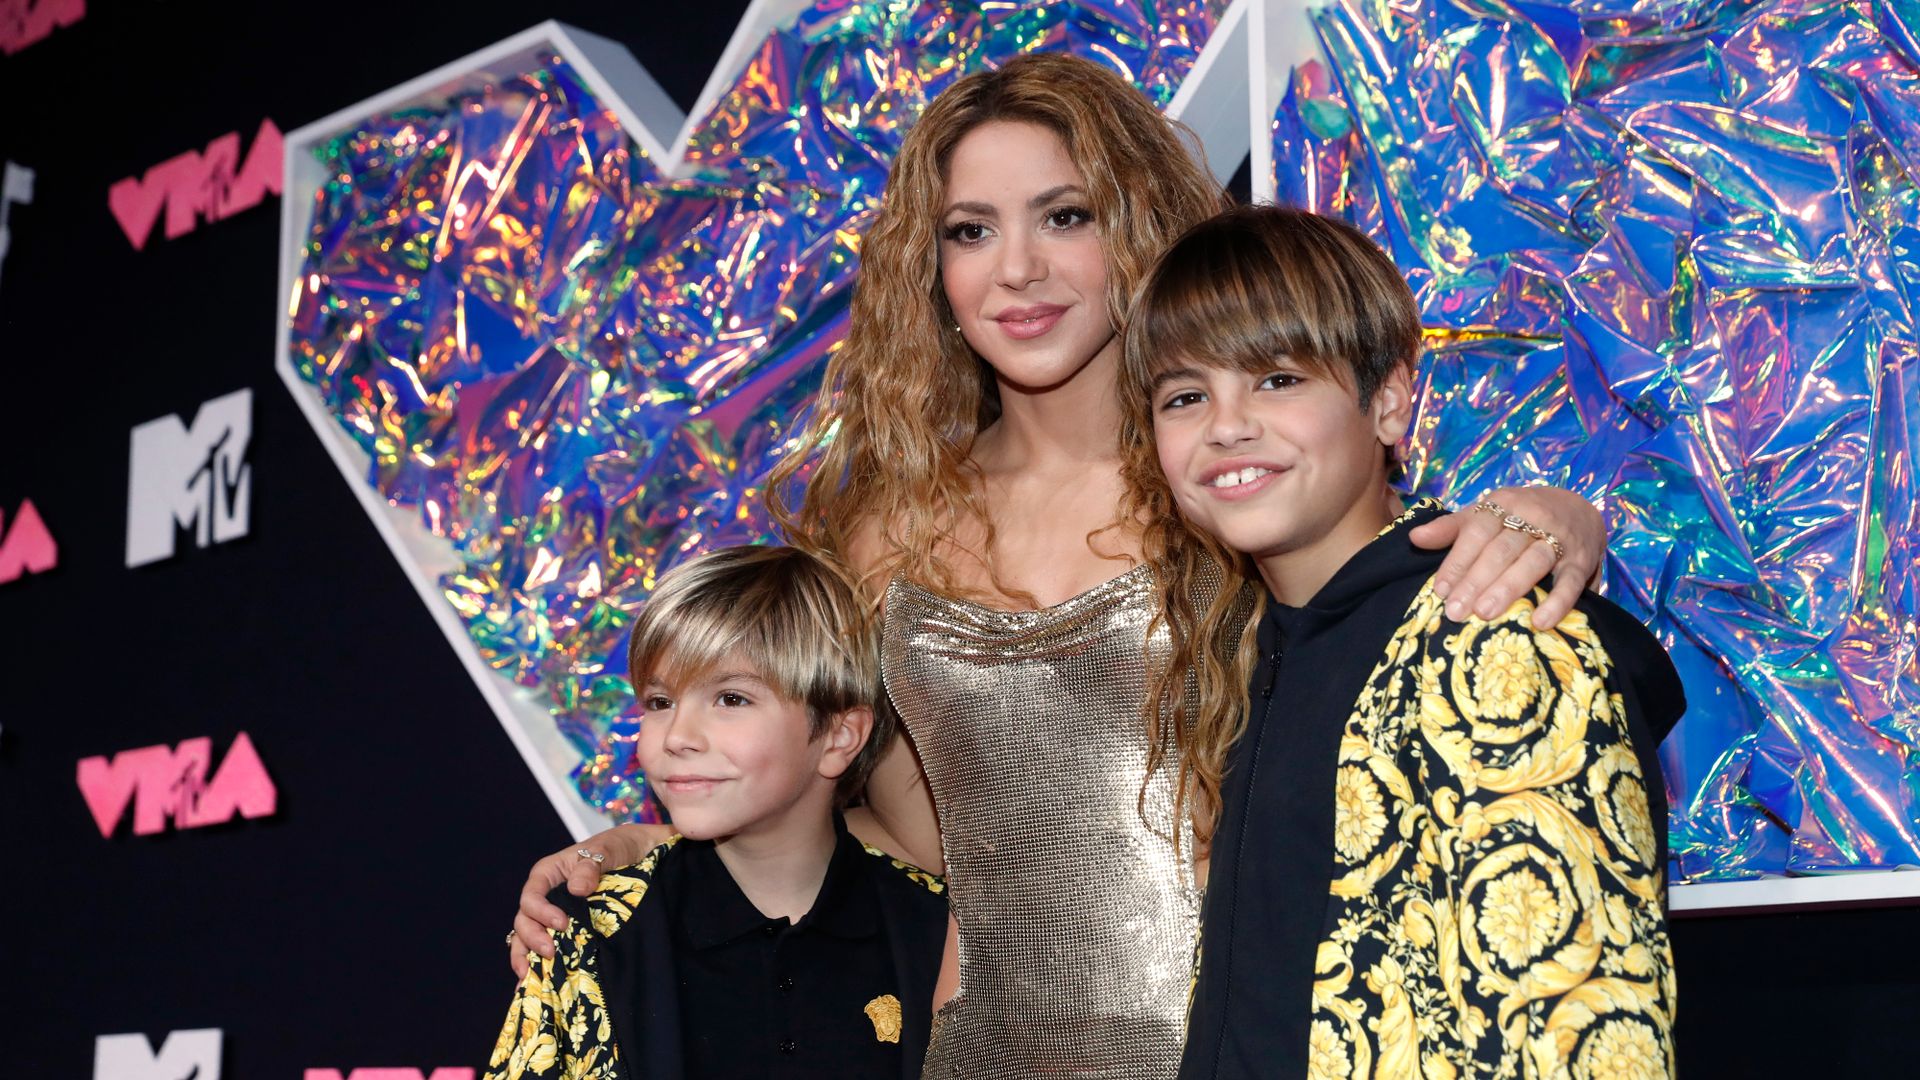 Shakira turns heads at the VMAs as her two sons make rare red carpet appearance with their mom